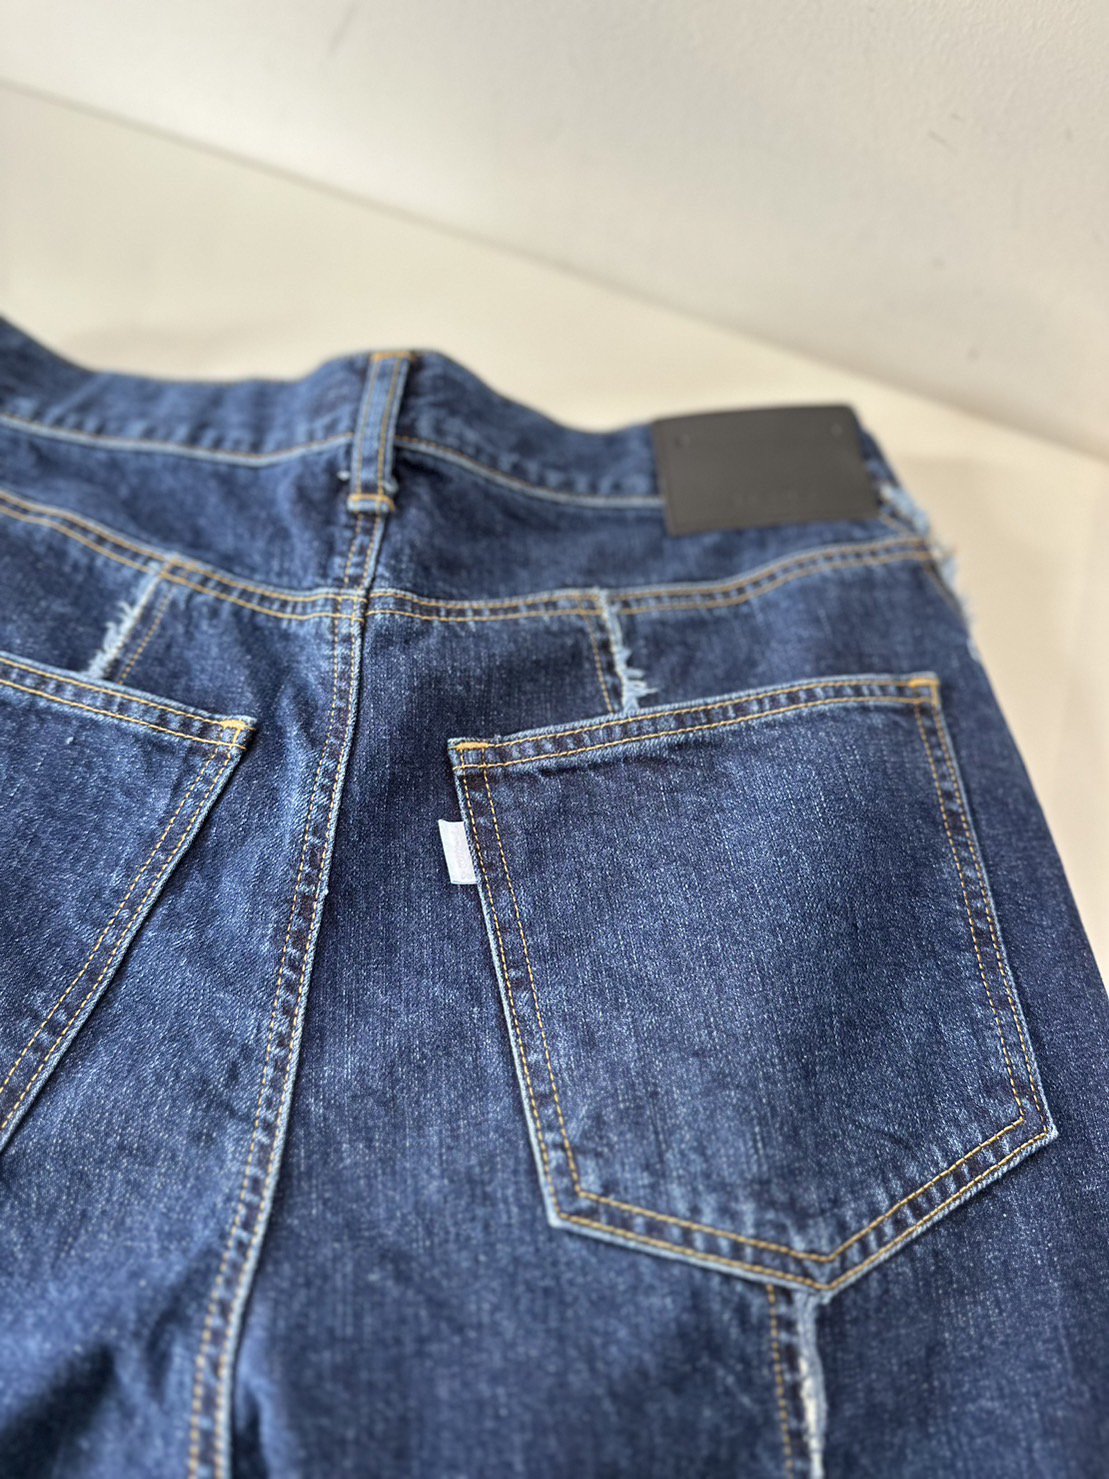 JieDa<br />USED LOOSE FIT JEANS / INDOGO<img class='new_mark_img2' src='https://img.shop-pro.jp/img/new/icons47.gif' style='border:none;display:inline;margin:0px;padding:0px;width:auto;' />